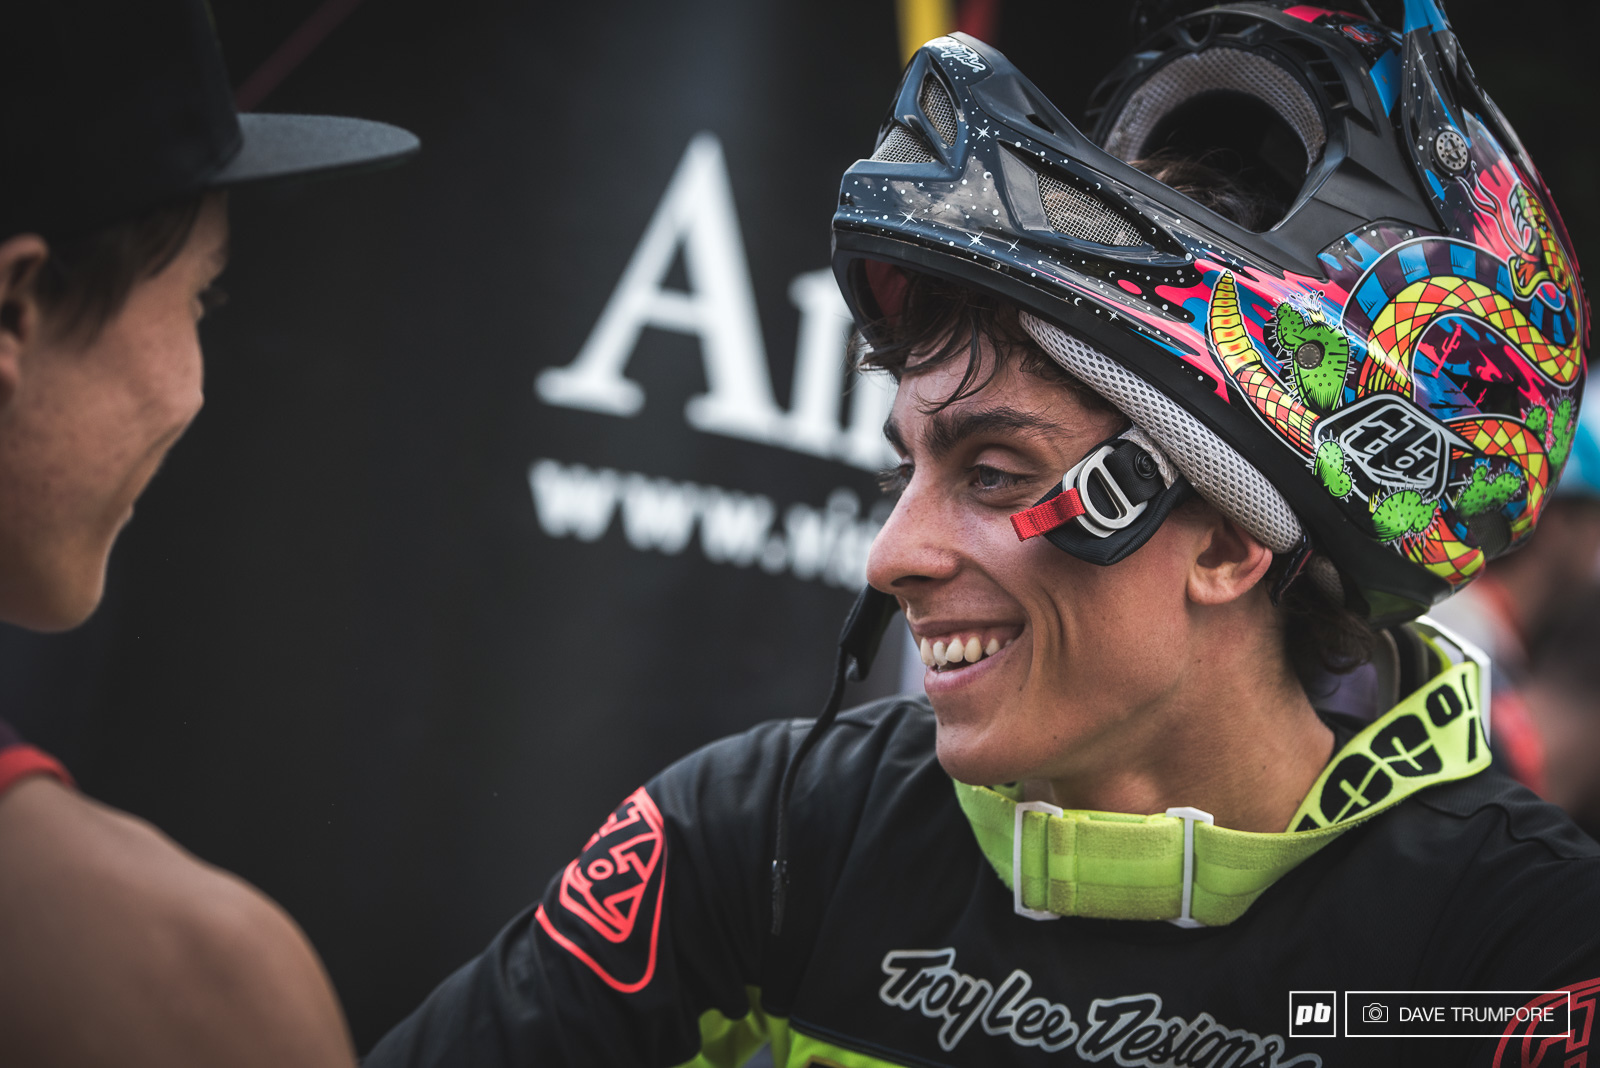 Amaury Pierron started the season with a 5th in Lourdes before breaking both wrists in Cairns. Today he backed that result up by qualifying 4th despite missing much of the season.